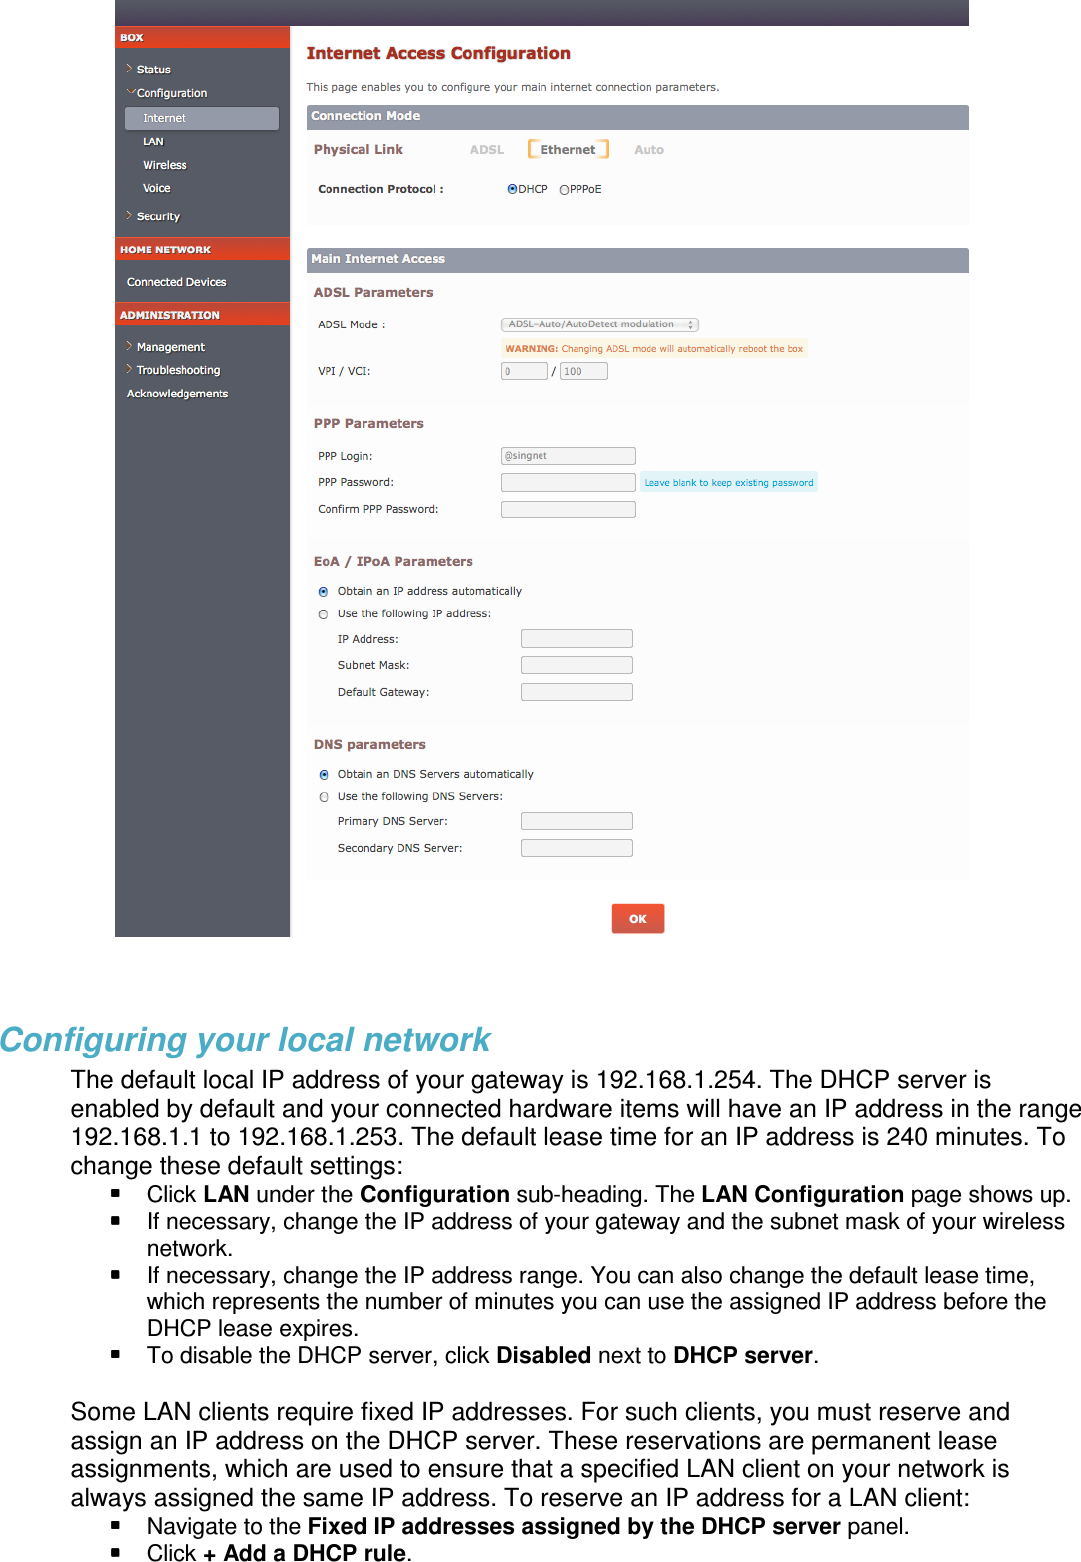     Configuring your local network The default local IP address of your gateway is 192.168.1.254. The DHCP server is enabled by default and your connected hardware items will have an IP address in the range 192.168.1.1 to 192.168.1.253. The default lease time for an IP address is 240 minutes. To change these default settings:  Click LAN under the Configuration sub-heading. The LAN Configuration page shows up.  If necessary, change the IP address of your gateway and the subnet mask of your wireless network.  If necessary, change the IP address range. You can also change the default lease time, which represents the number of minutes you can use the assigned IP address before the DHCP lease expires.  To disable the DHCP server, click Disabled next to DHCP server.  Some LAN clients require fixed IP addresses. For such clients, you must reserve and assign an IP address on the DHCP server. These reservations are permanent lease assignments, which are used to ensure that a specified LAN client on your network is always assigned the same IP address. To reserve an IP address for a LAN client:  Navigate to the Fixed IP addresses assigned by the DHCP server panel.  Click + Add a DHCP rule.  